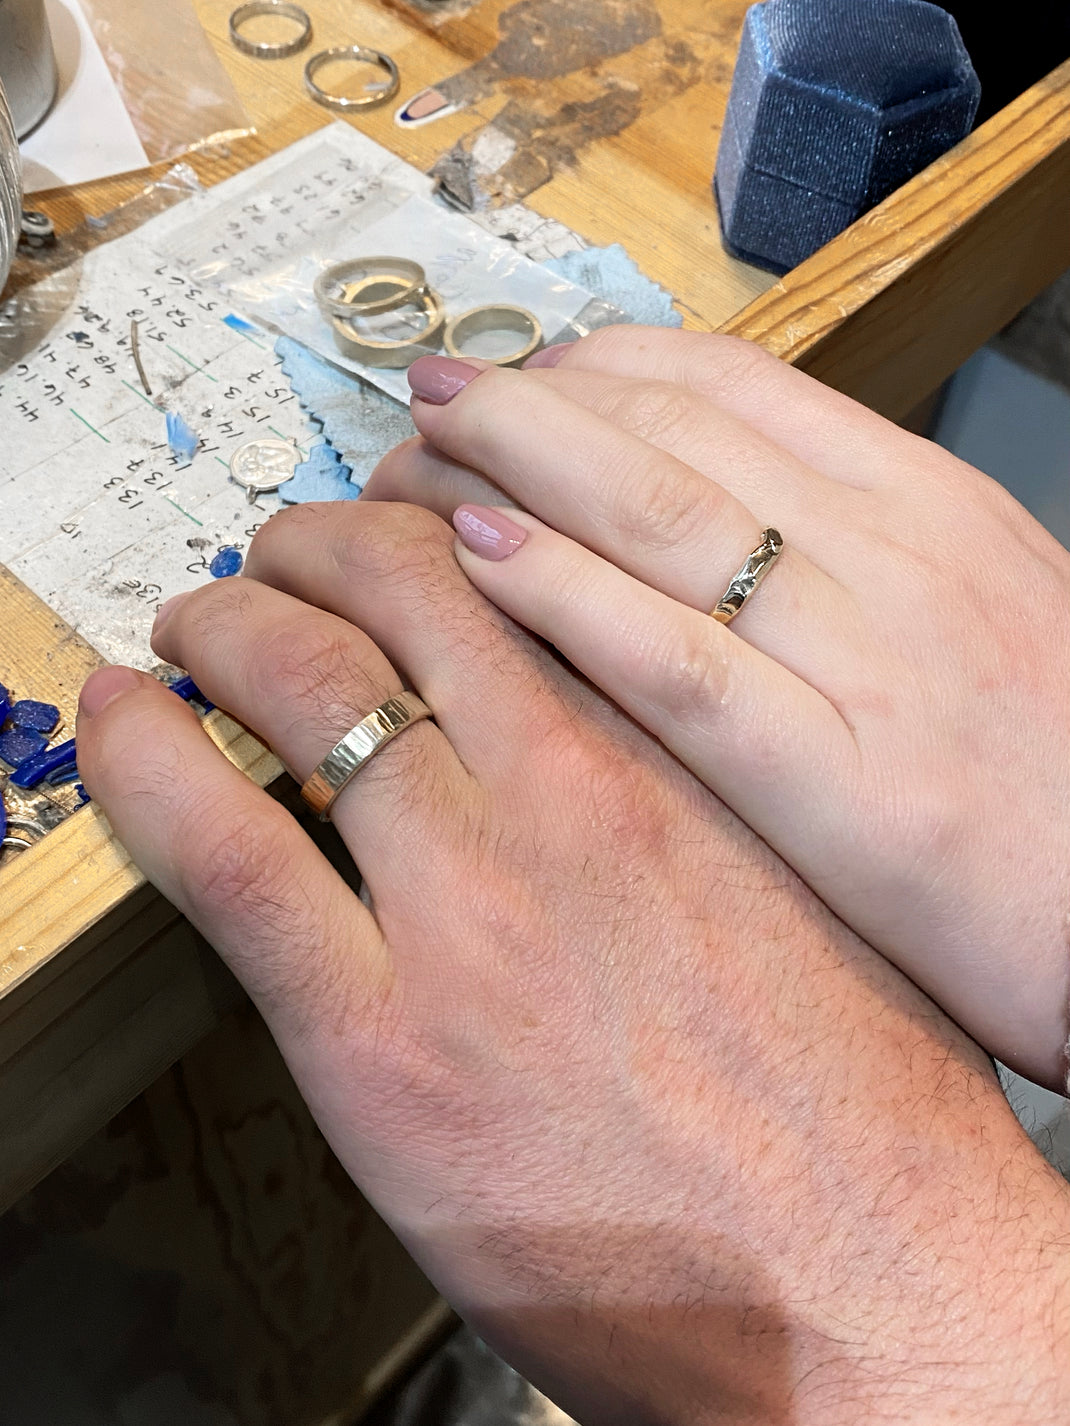 Two hands at work bench with their textured handmade wedding rings